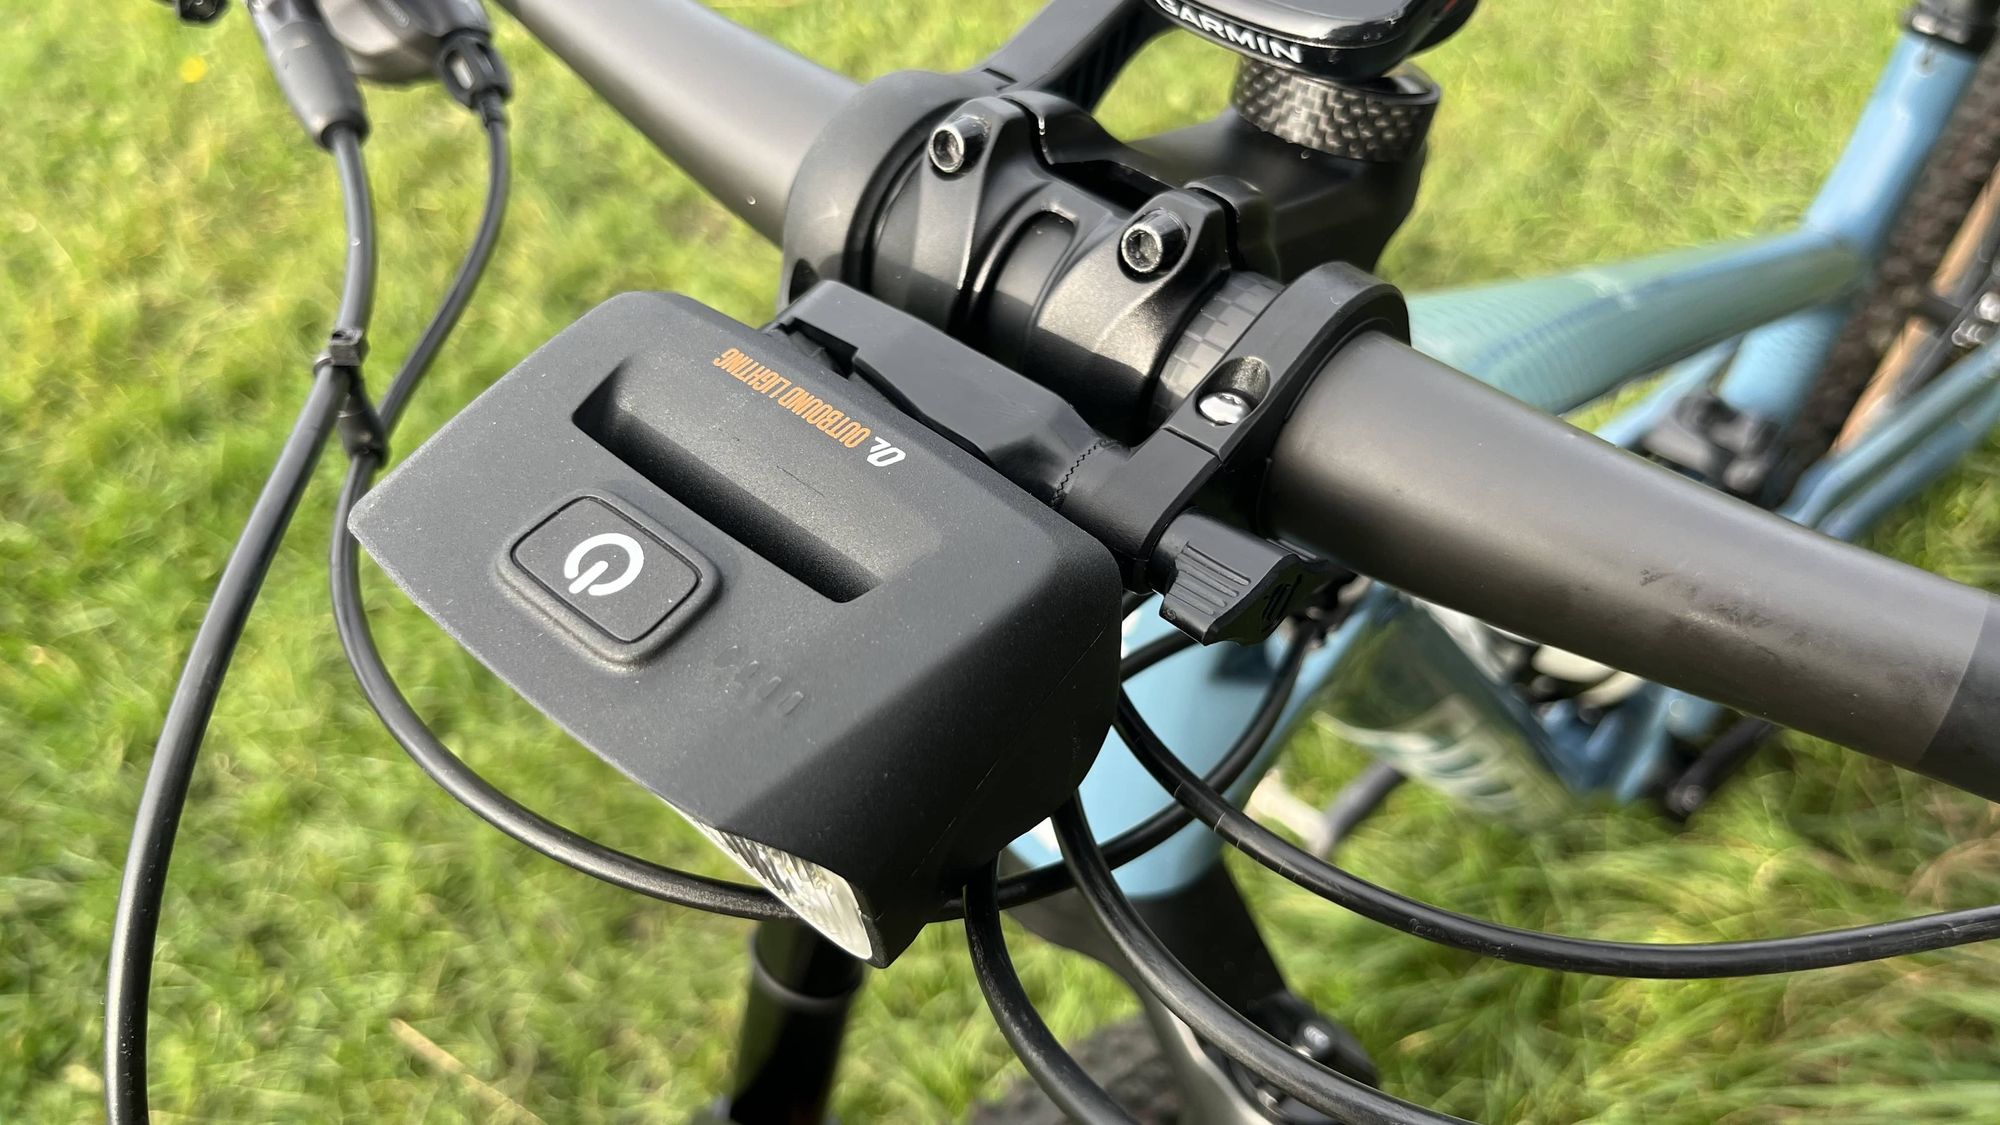 The Complete Guide to Bike Lights for Every Rider